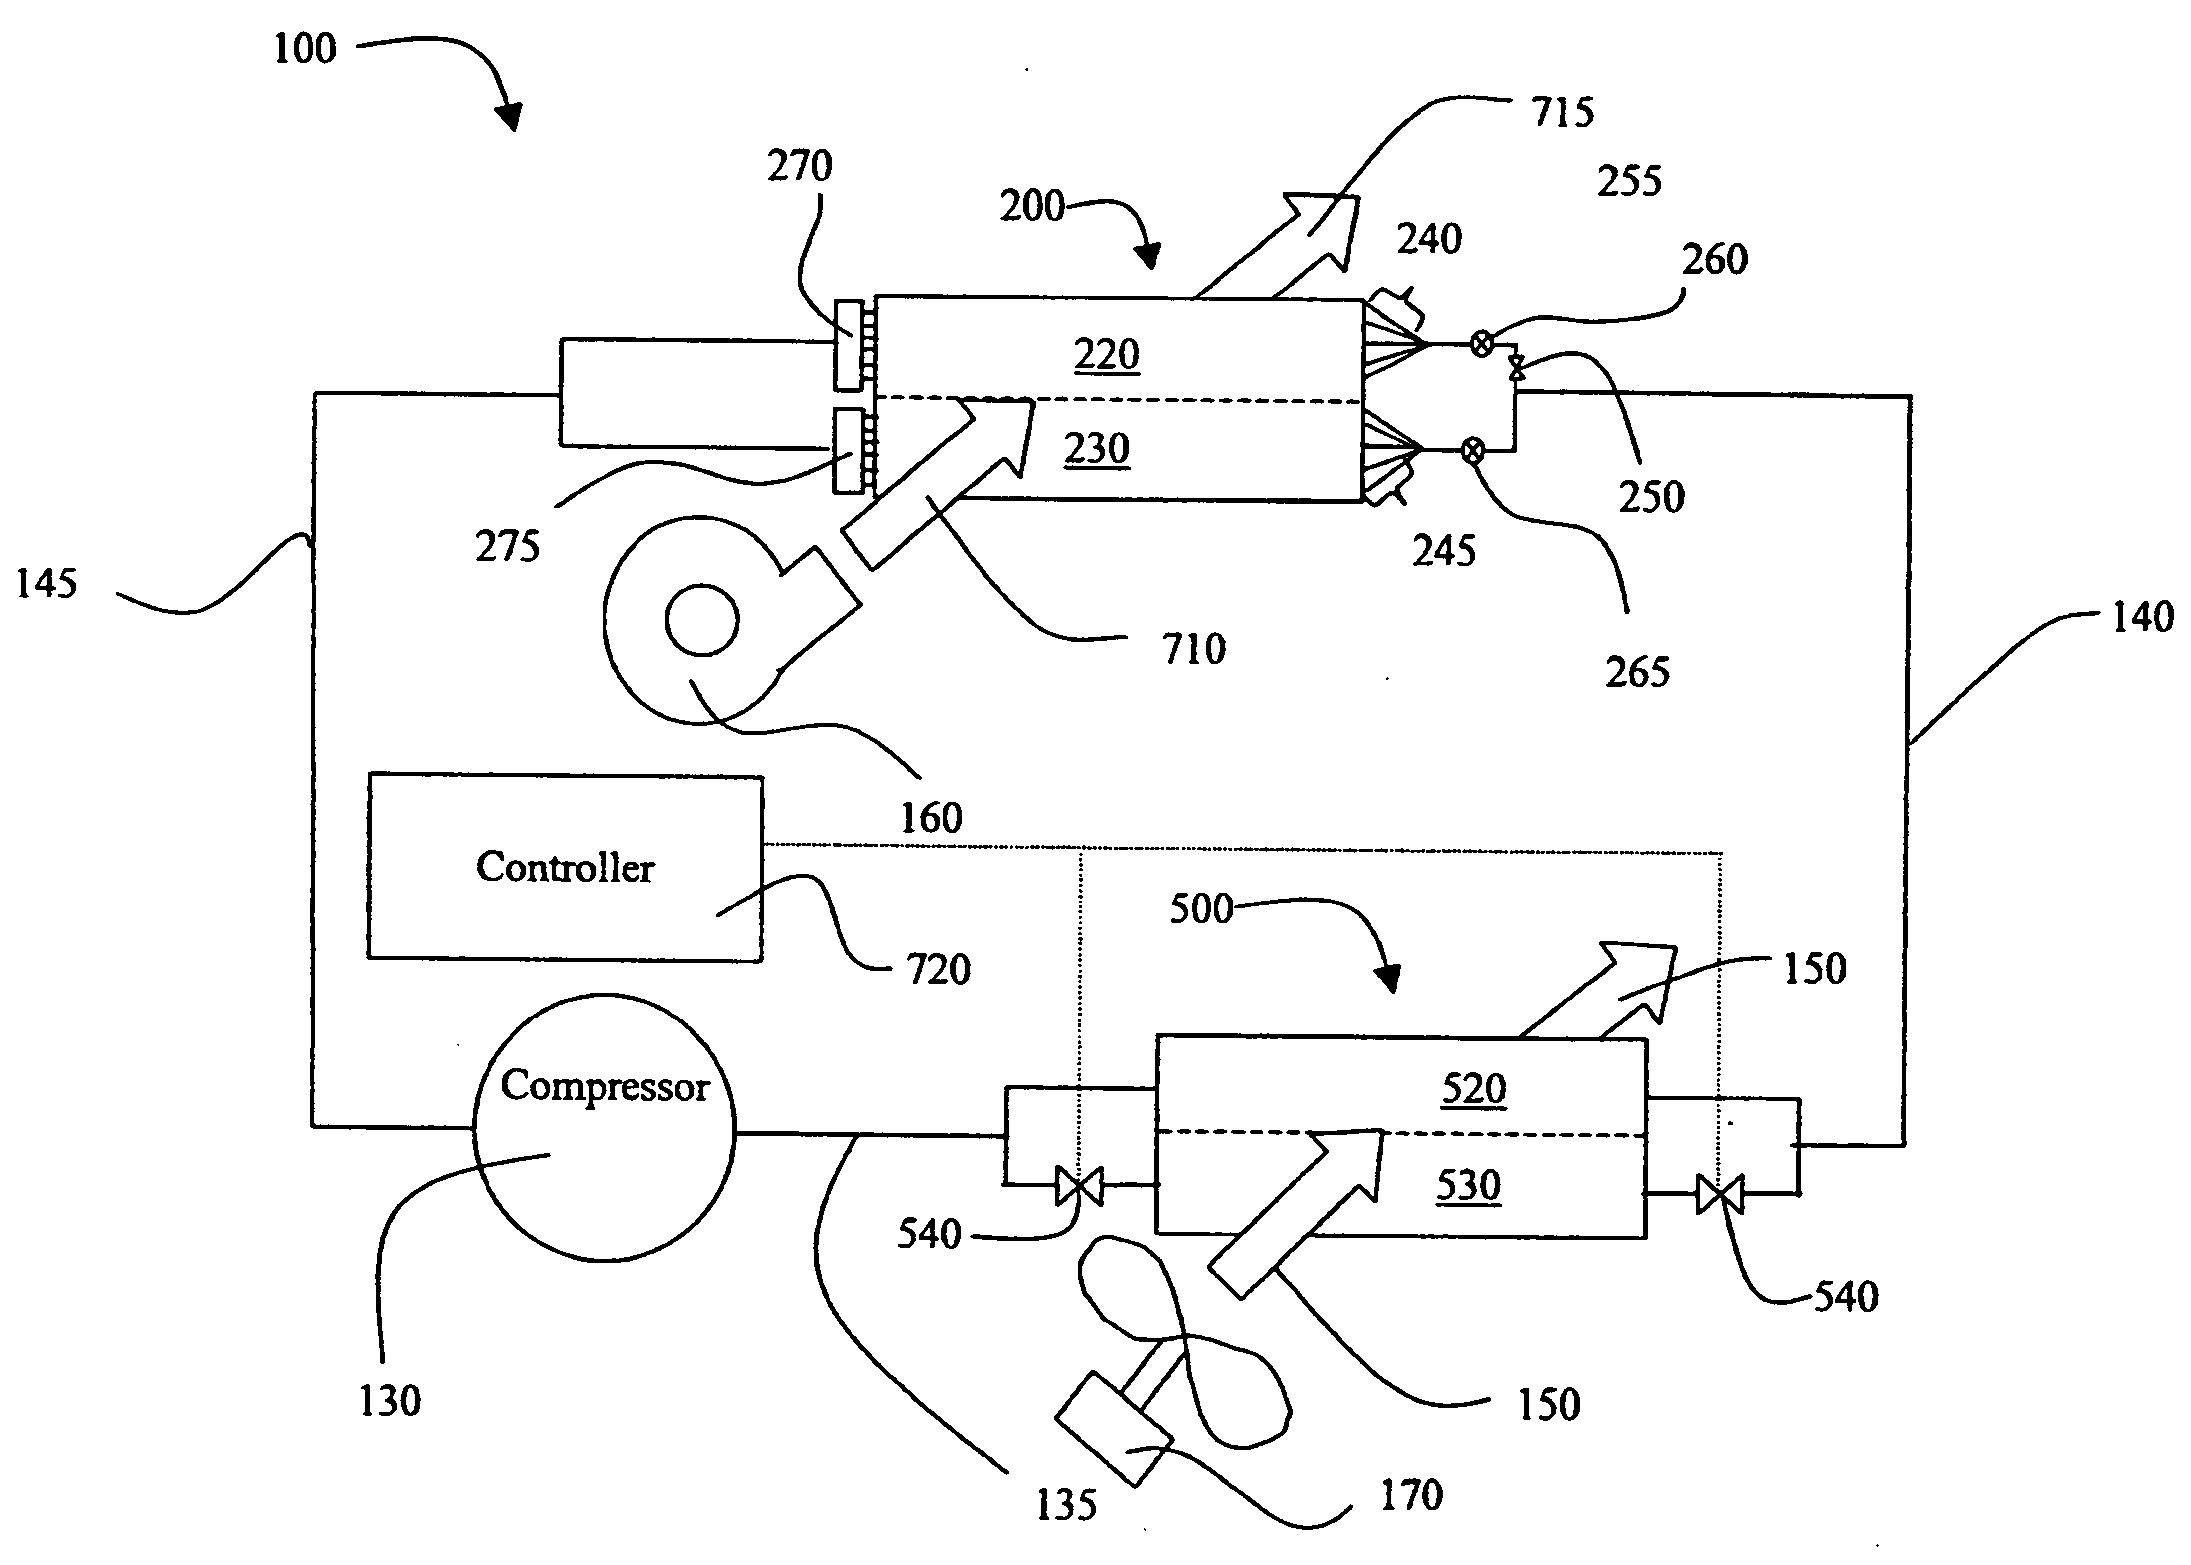 Method and system for dehumidification and refrigerant pressure control